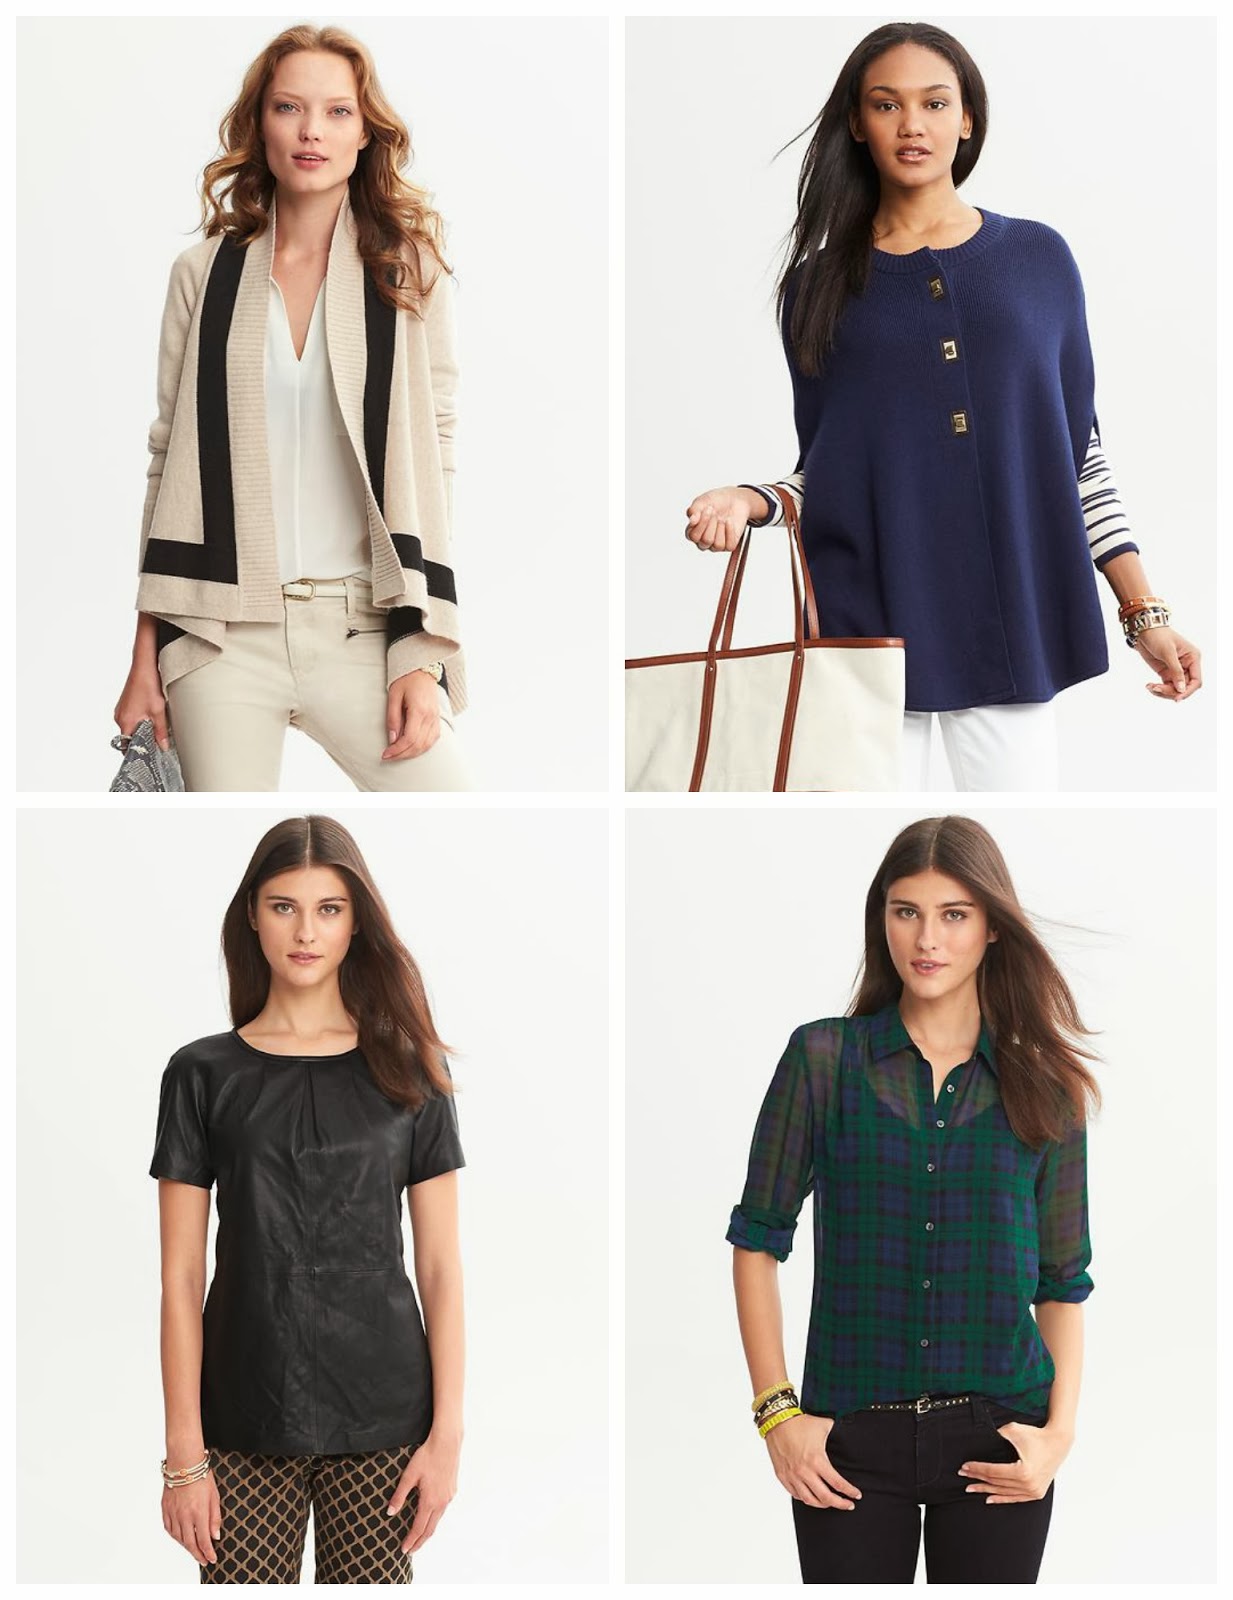 Dooley Noted Style: Sale Time with Banana Republic